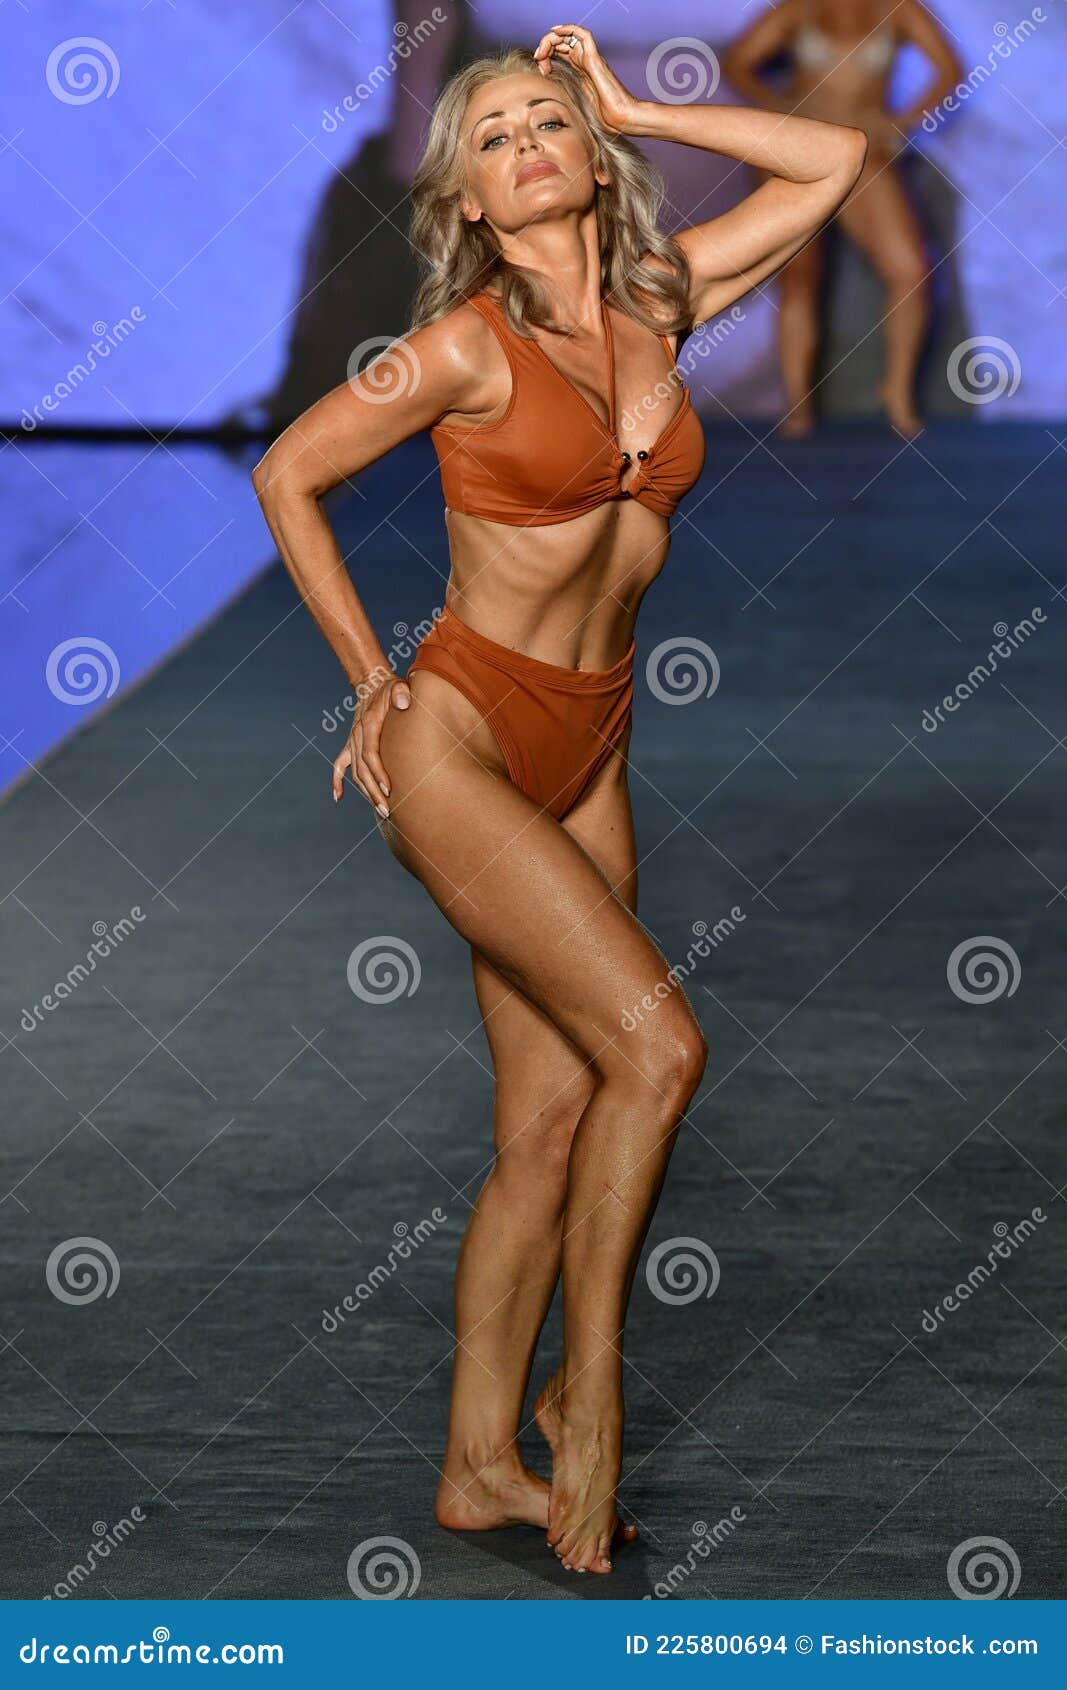 Kathy Jacobs Walks the Runway during the 2021 Sports Illustrated